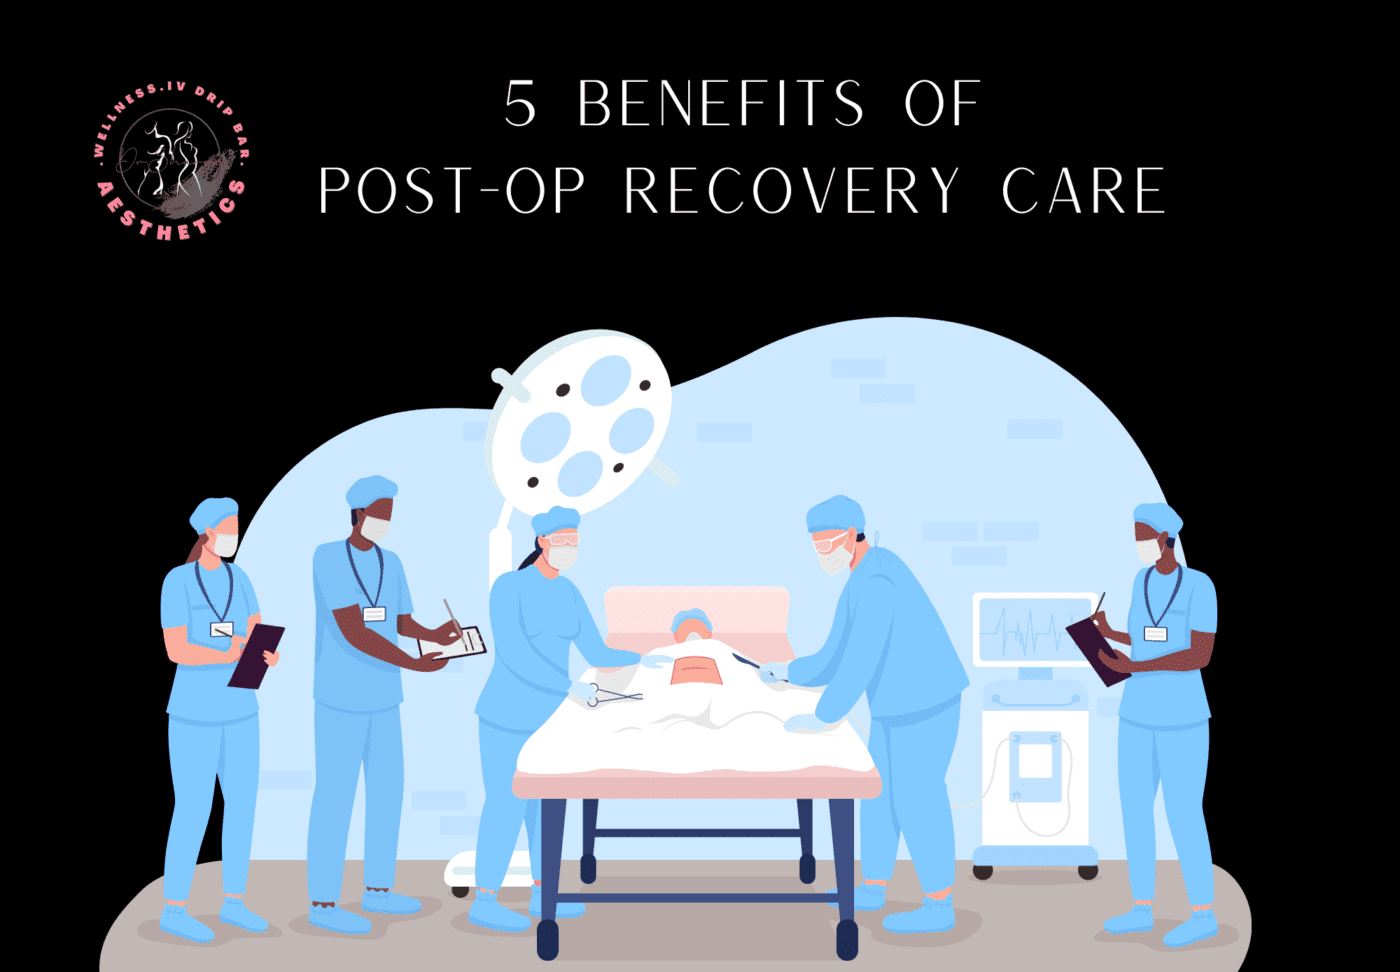 5 benefits of post-op recovery care